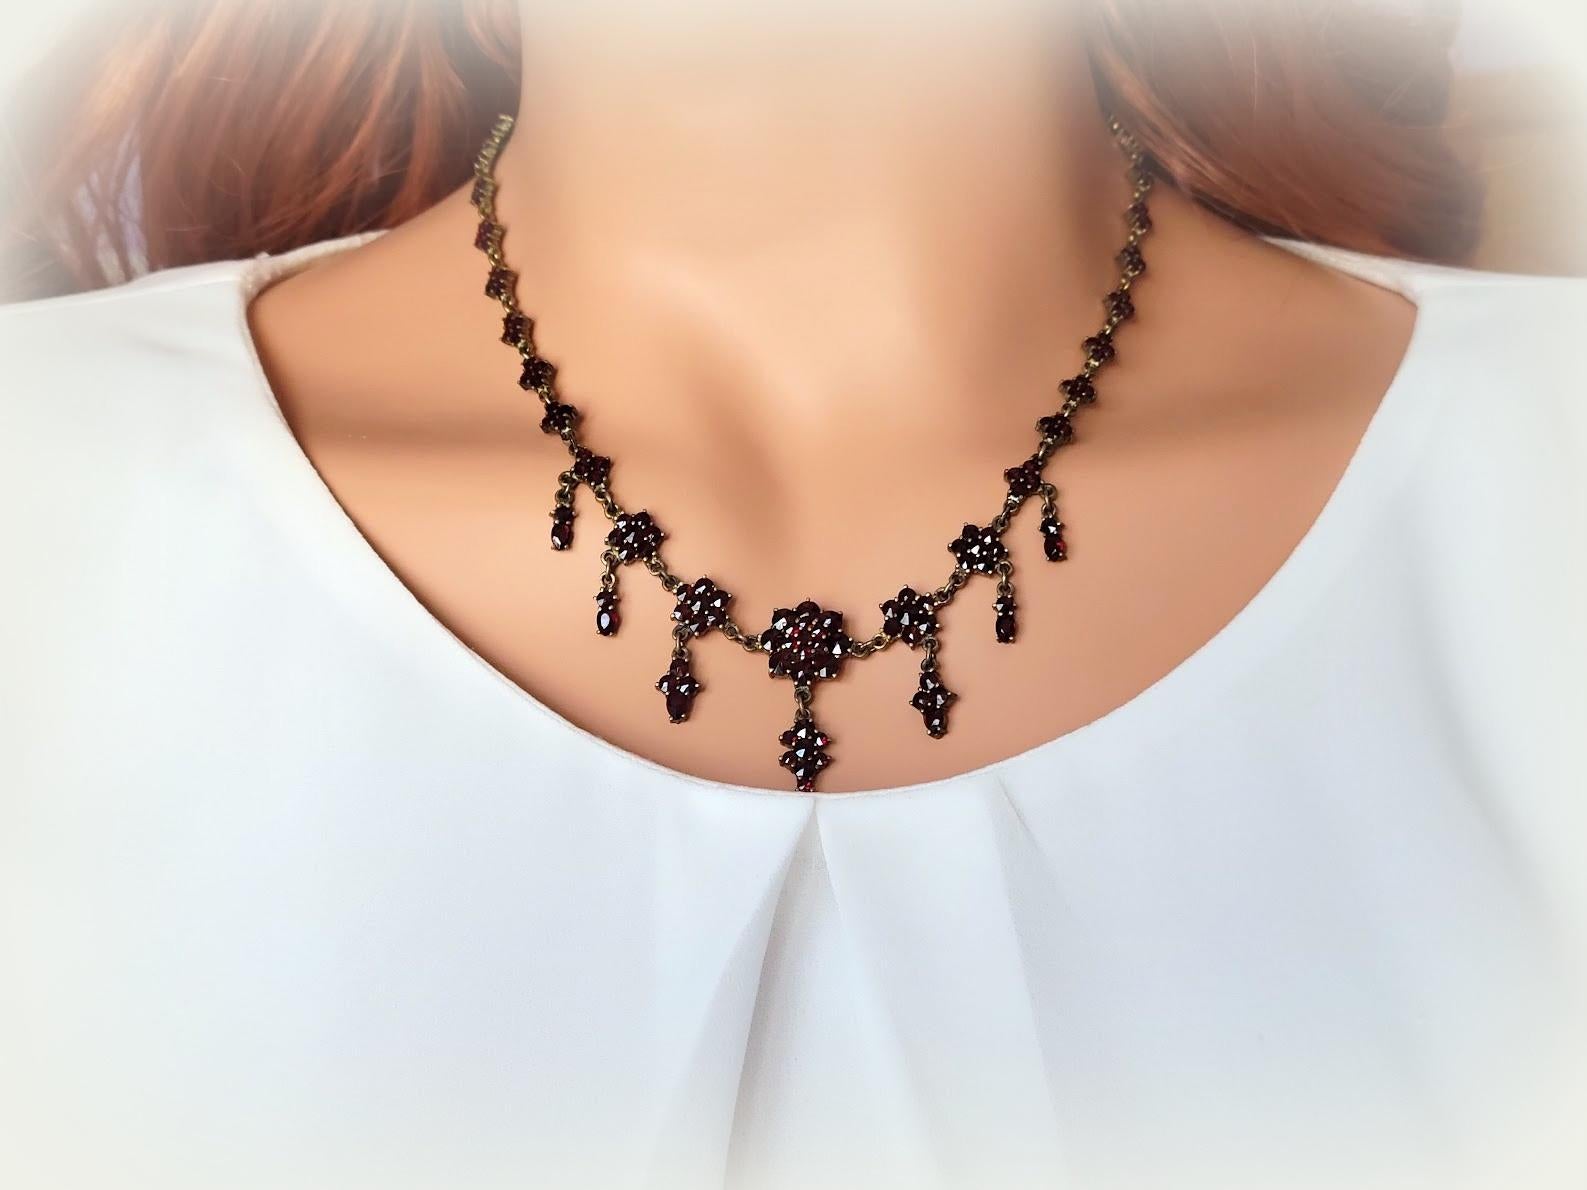 Bohemian garnet jewelry dates back to the 19th century. During this time, garnets were one of the most popular gems used in jewelry production. 

The elegant example of bohemian garnet jewelry from the Victorian era. This fabulous festoon-style